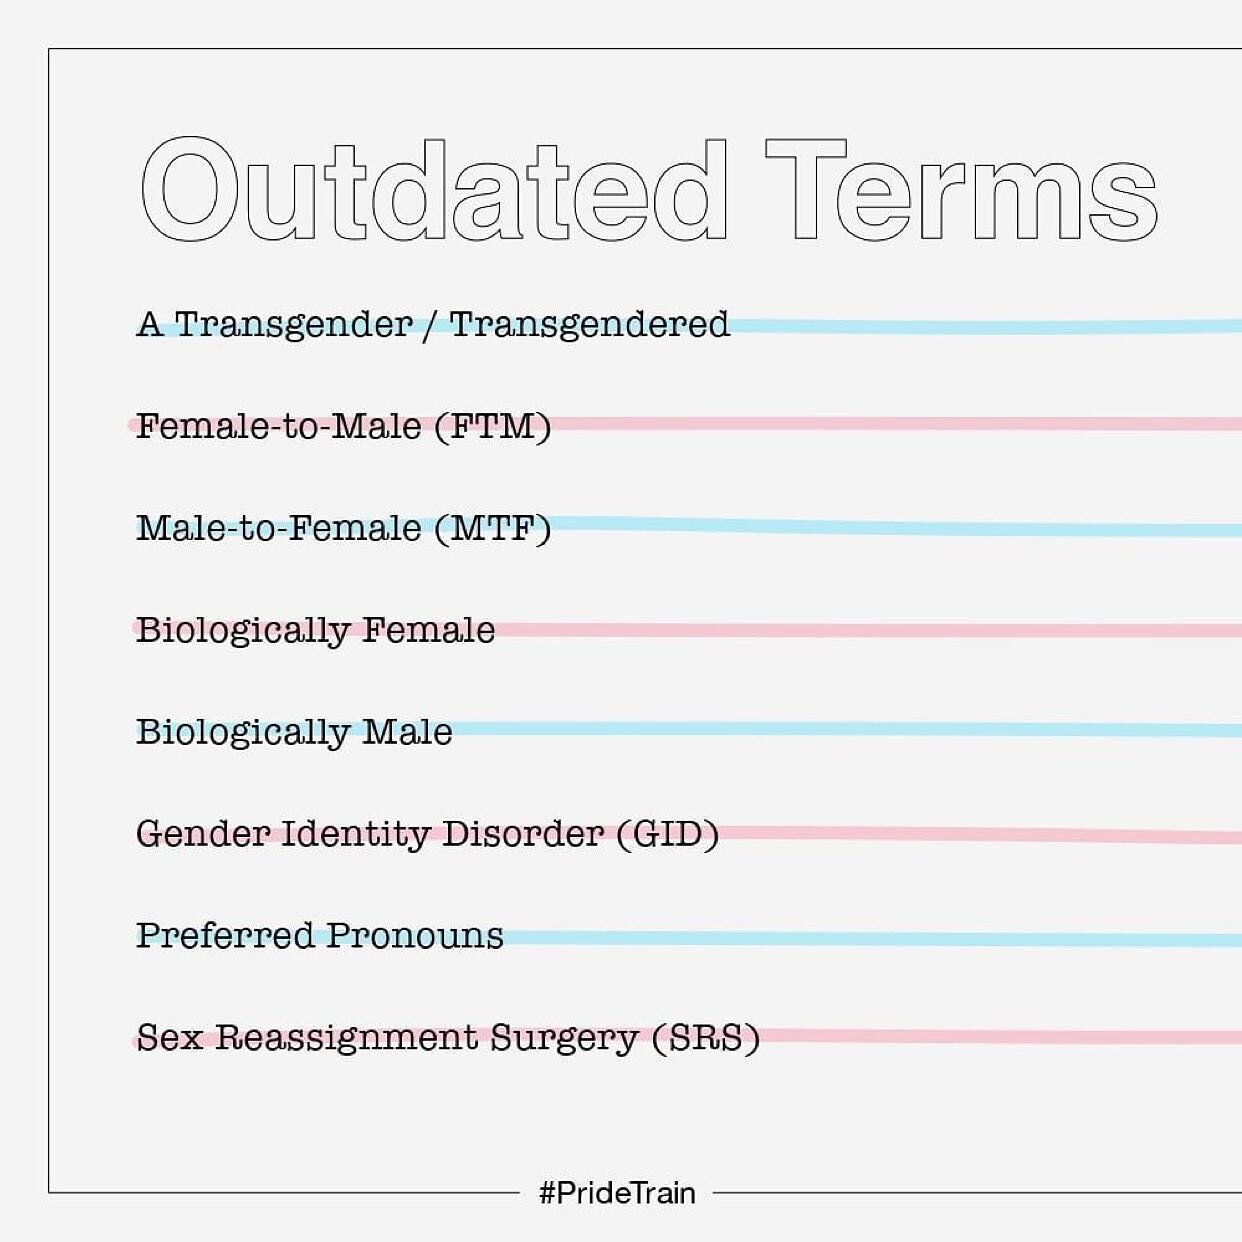 The more you know💡 Repost from @pridetrain
&bull;
A non-exhaustive list of
OUTDATE &amp; CURRENT TRANS TERMS

The power of language to shape our perceptions of other people is immense. While certain terms may have been commonly used years ago, they 